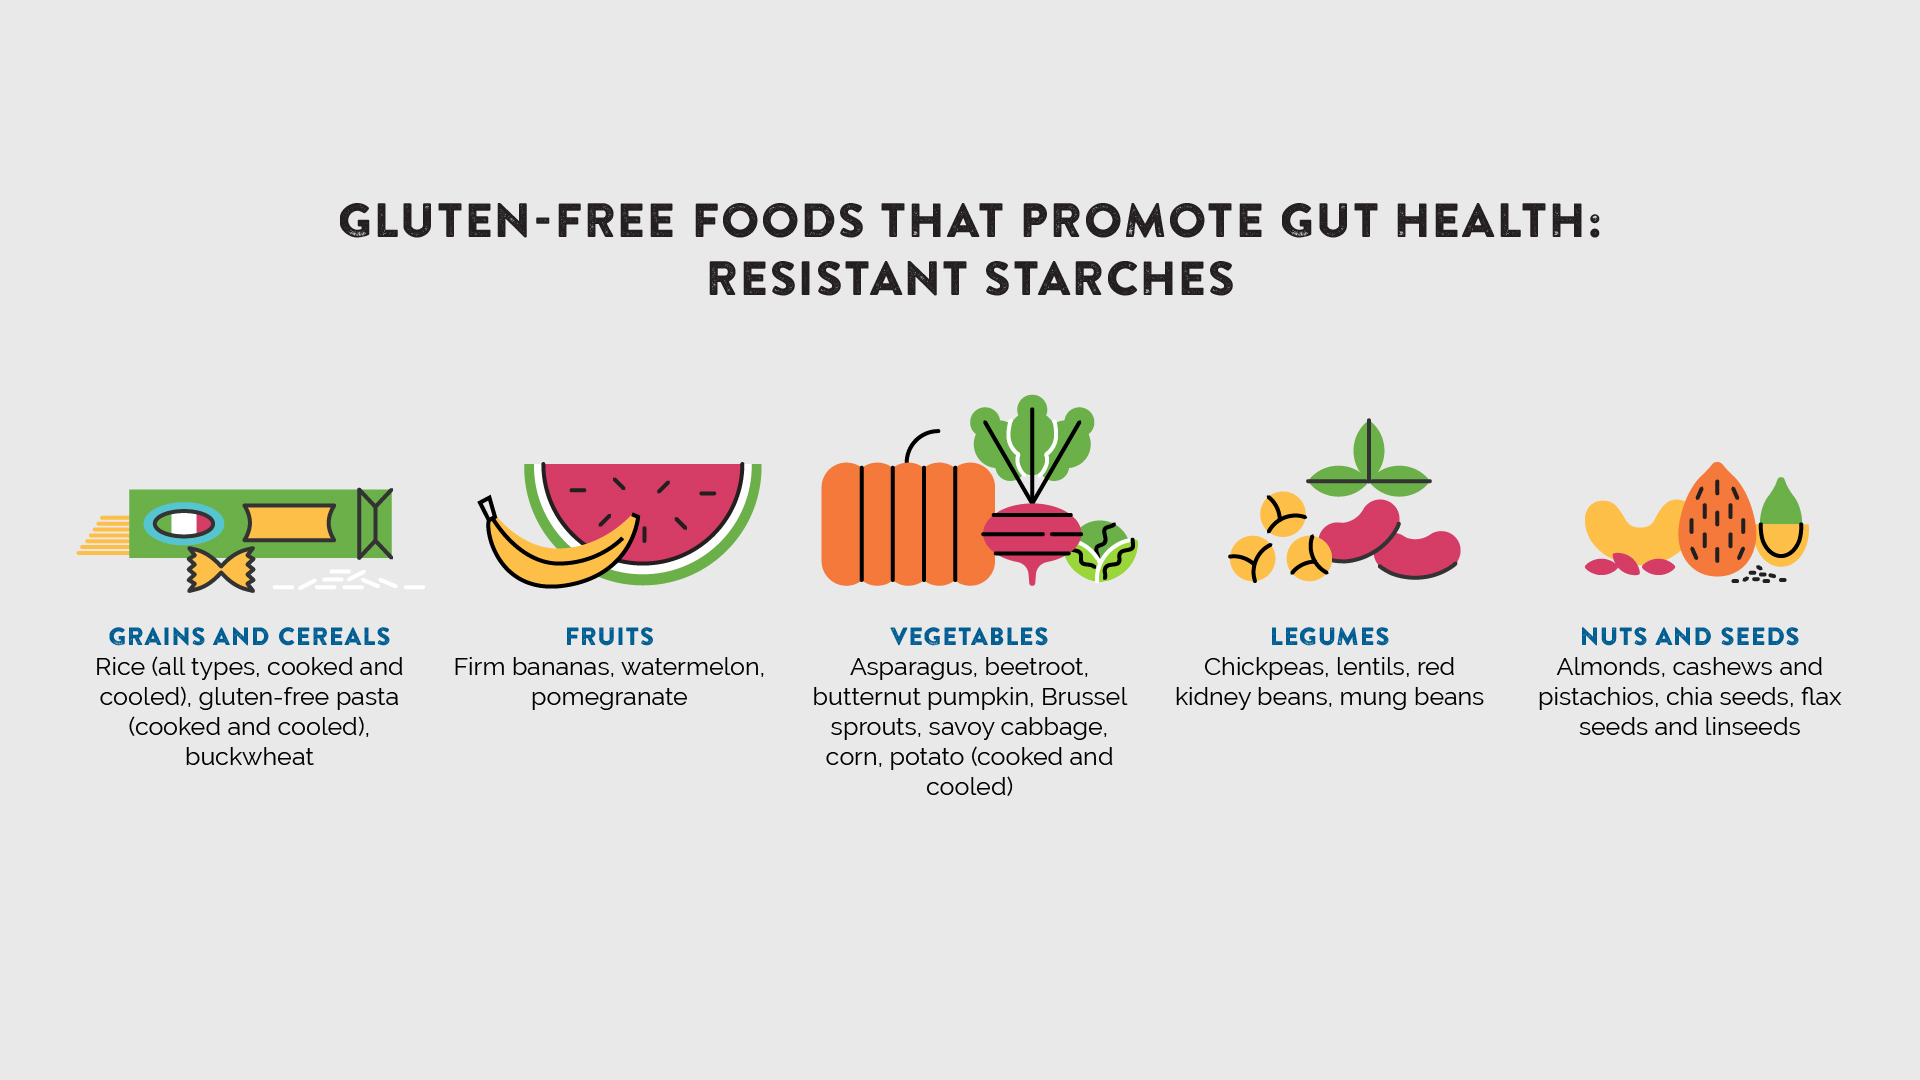 Gluten-free foods that promote gut health include grains and cereals, fruits, vegetables, legumes and nuts